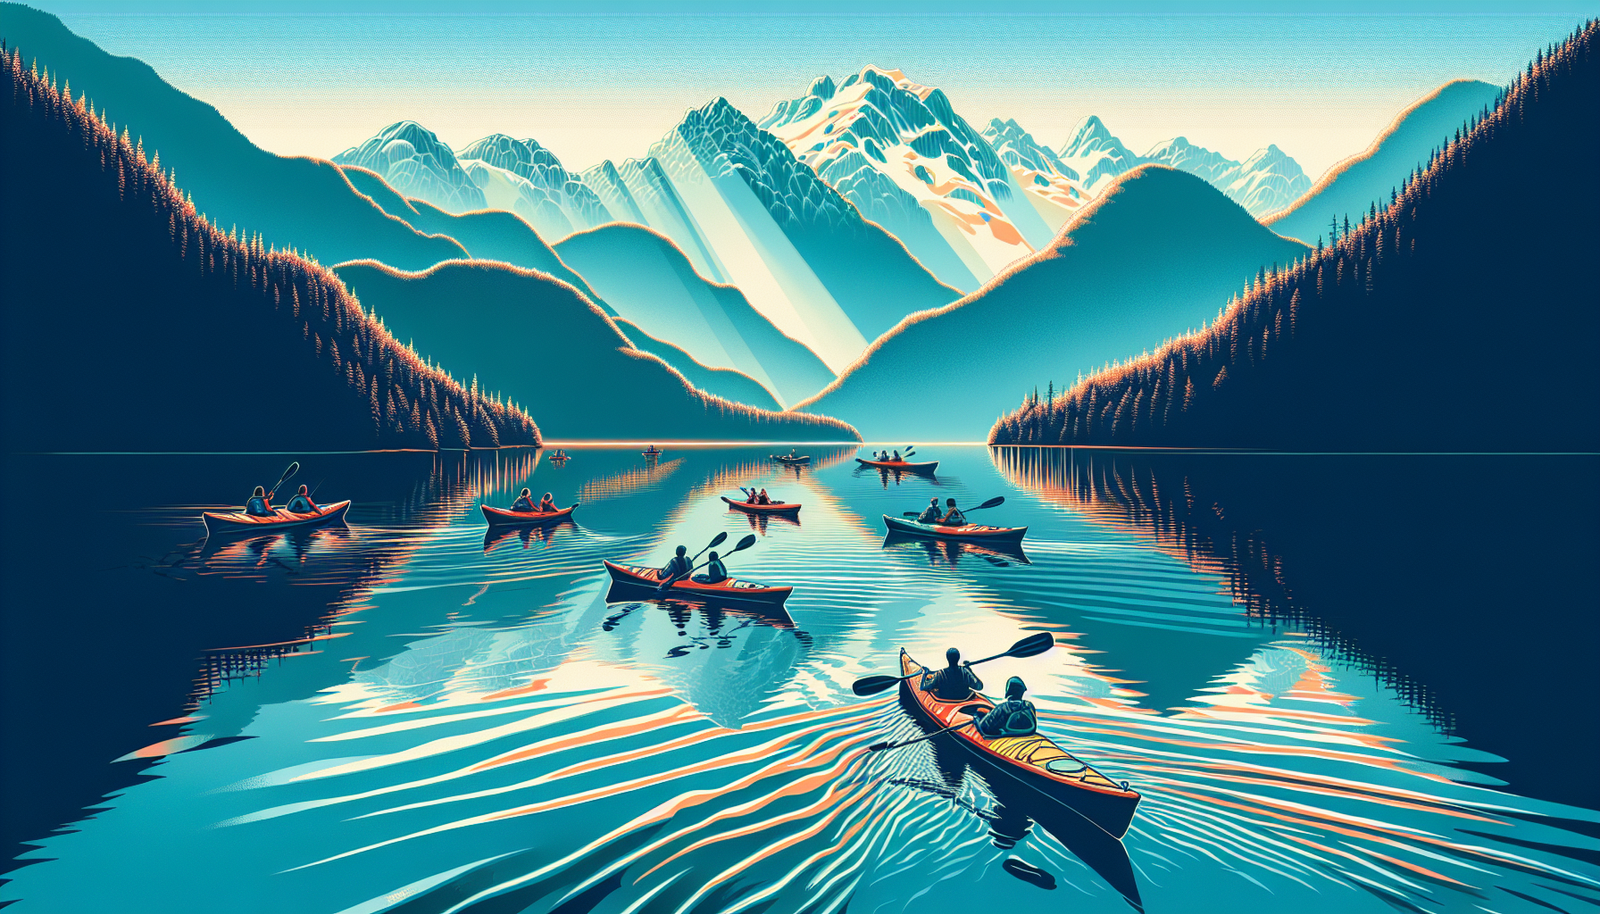 Illustration of kayaking on Cowichan Lake with scenic mountains in the background